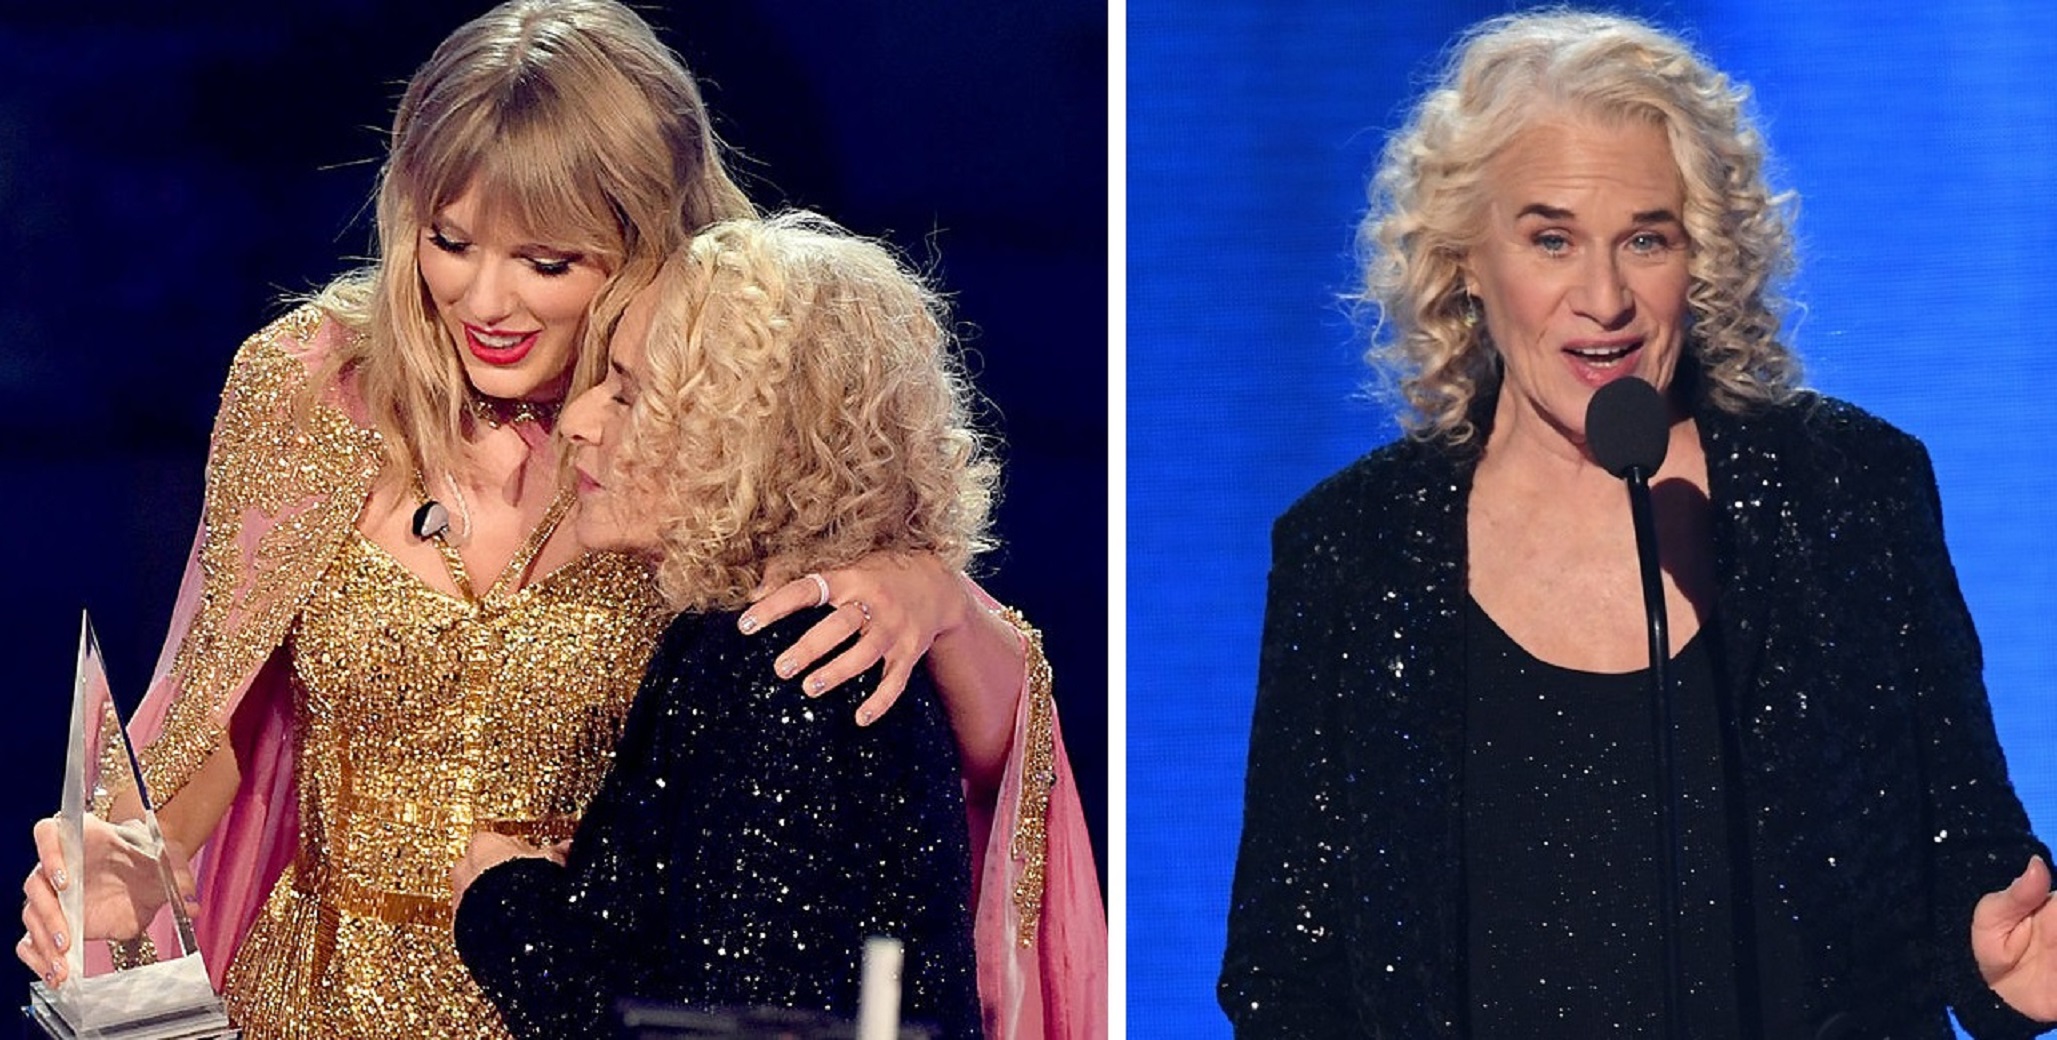 Carole King Presents ‘Artist Of The Decade’ Award To Taylor Swift